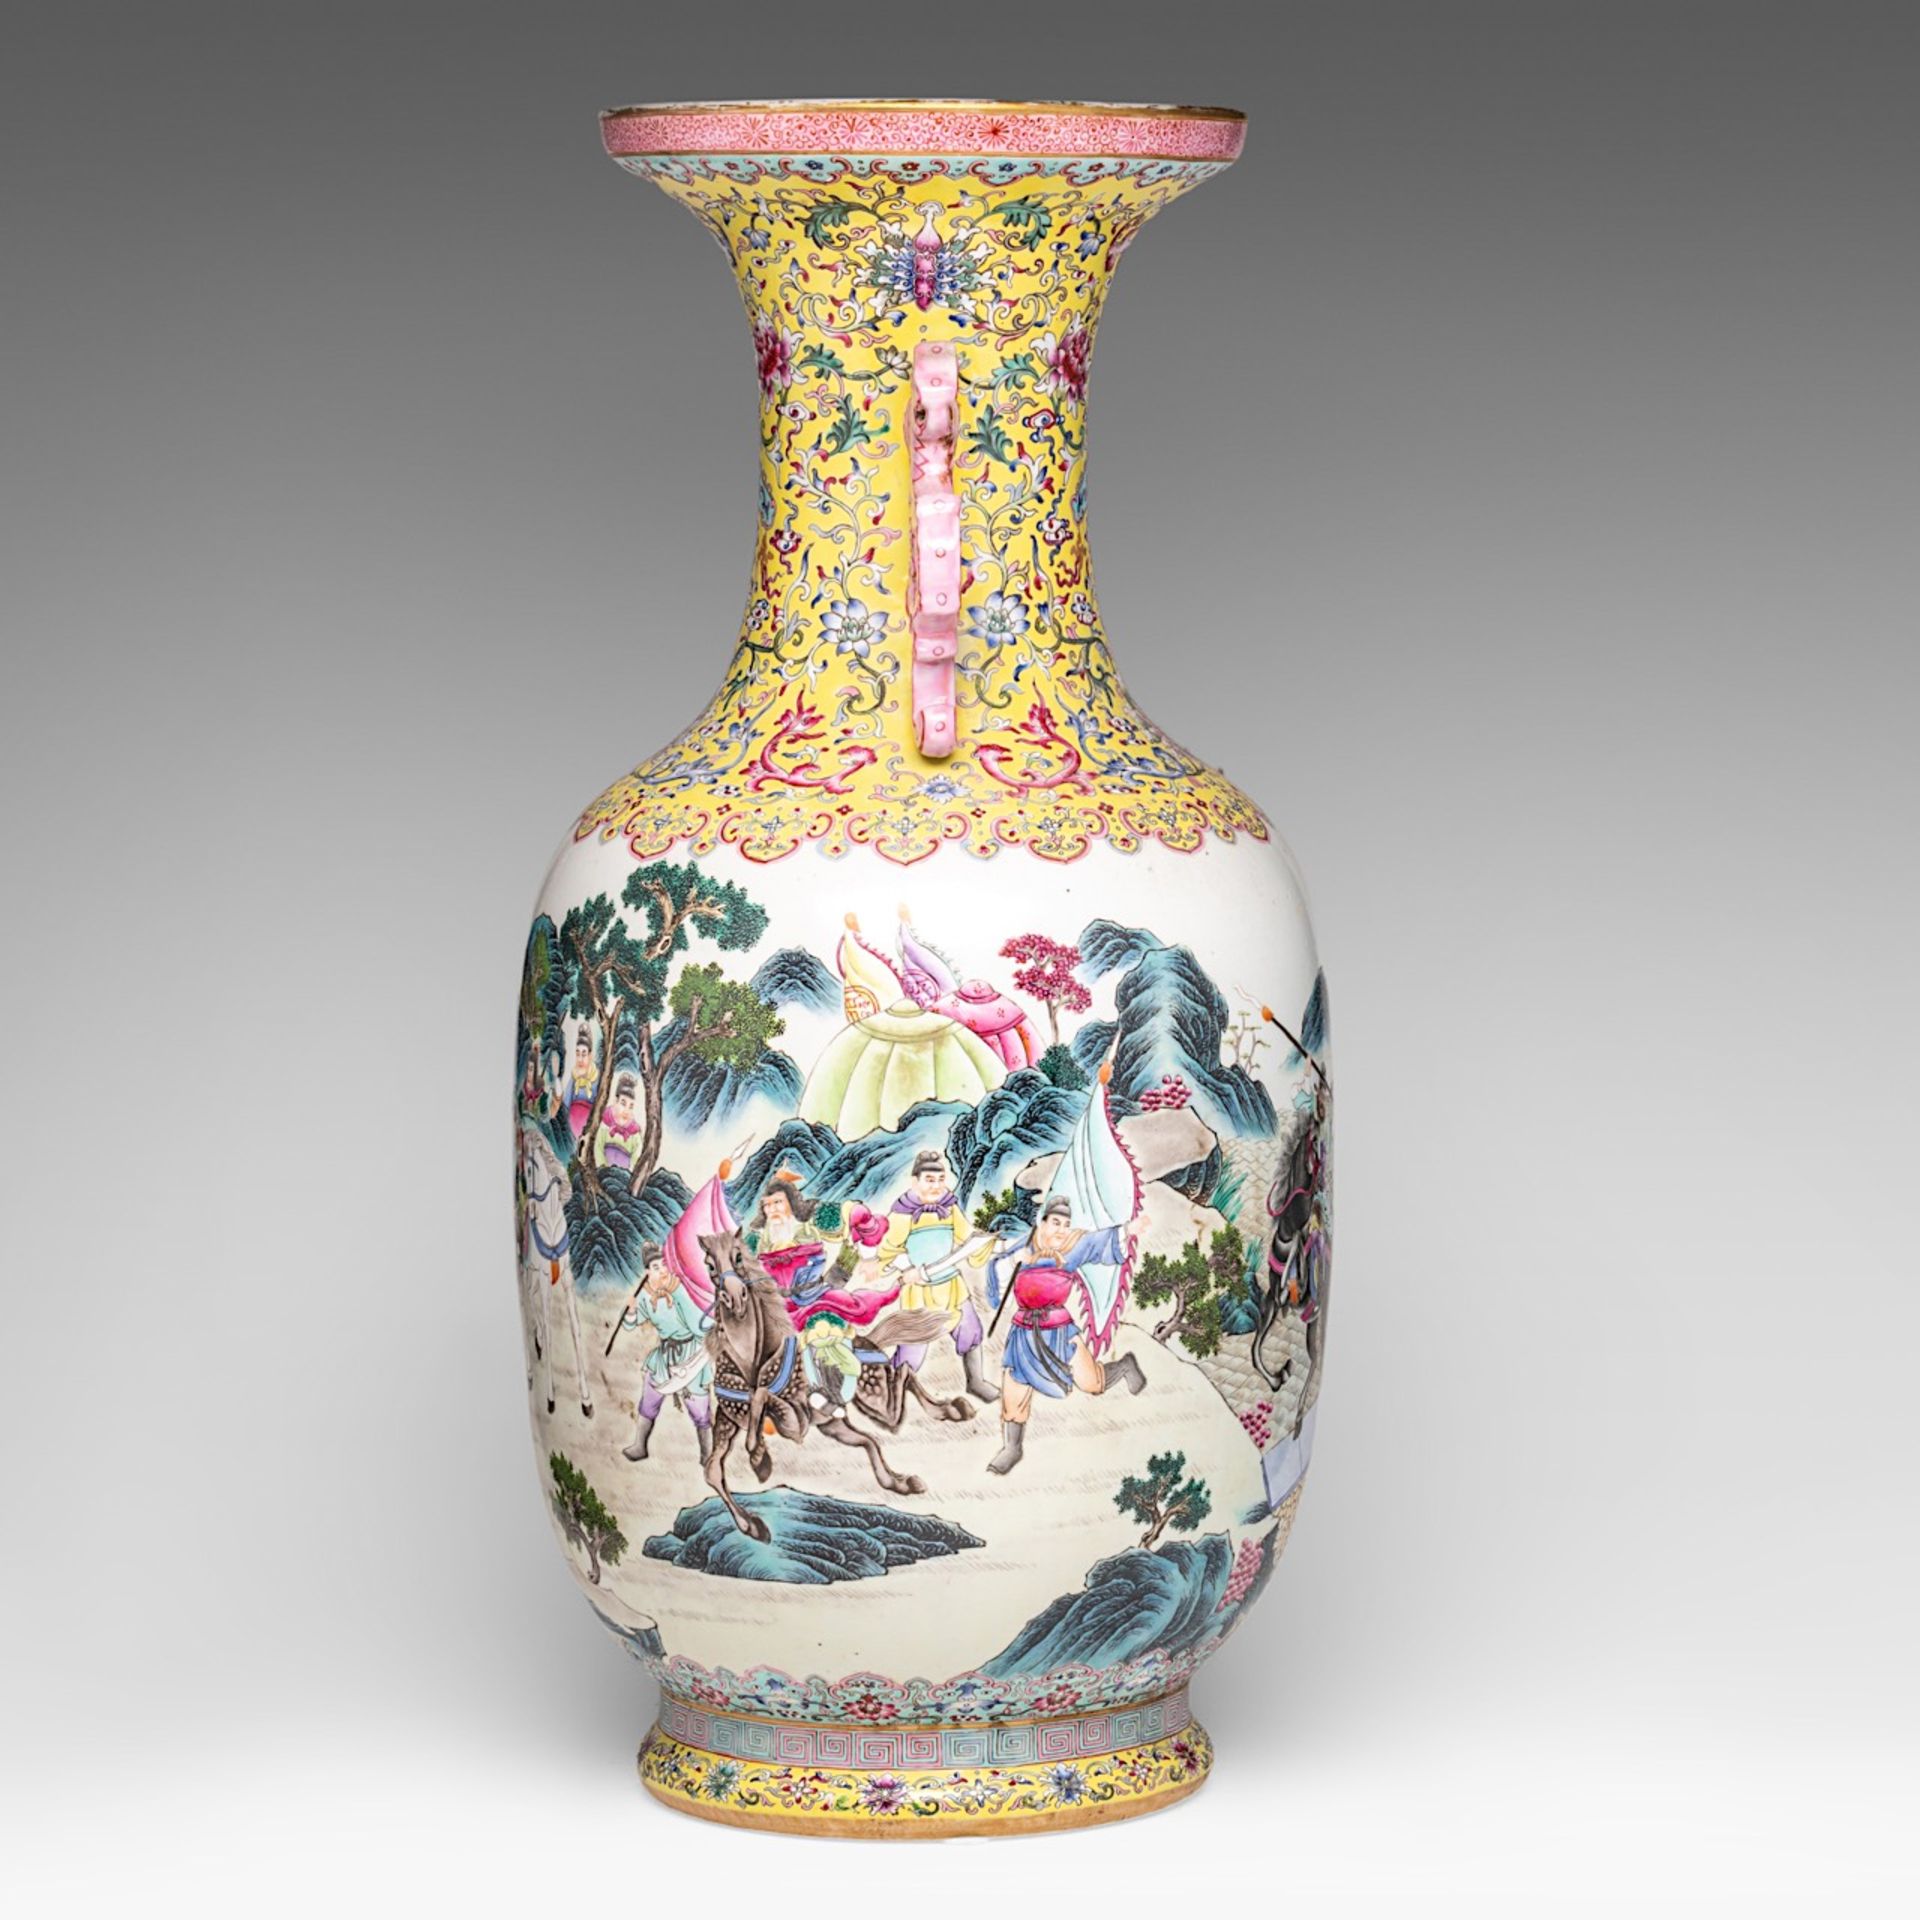 A large Chinese famille jaune and rose begonia-shaped vase, with a Qianlong mark, late 19thC, H 71,3 - Bild 2 aus 7